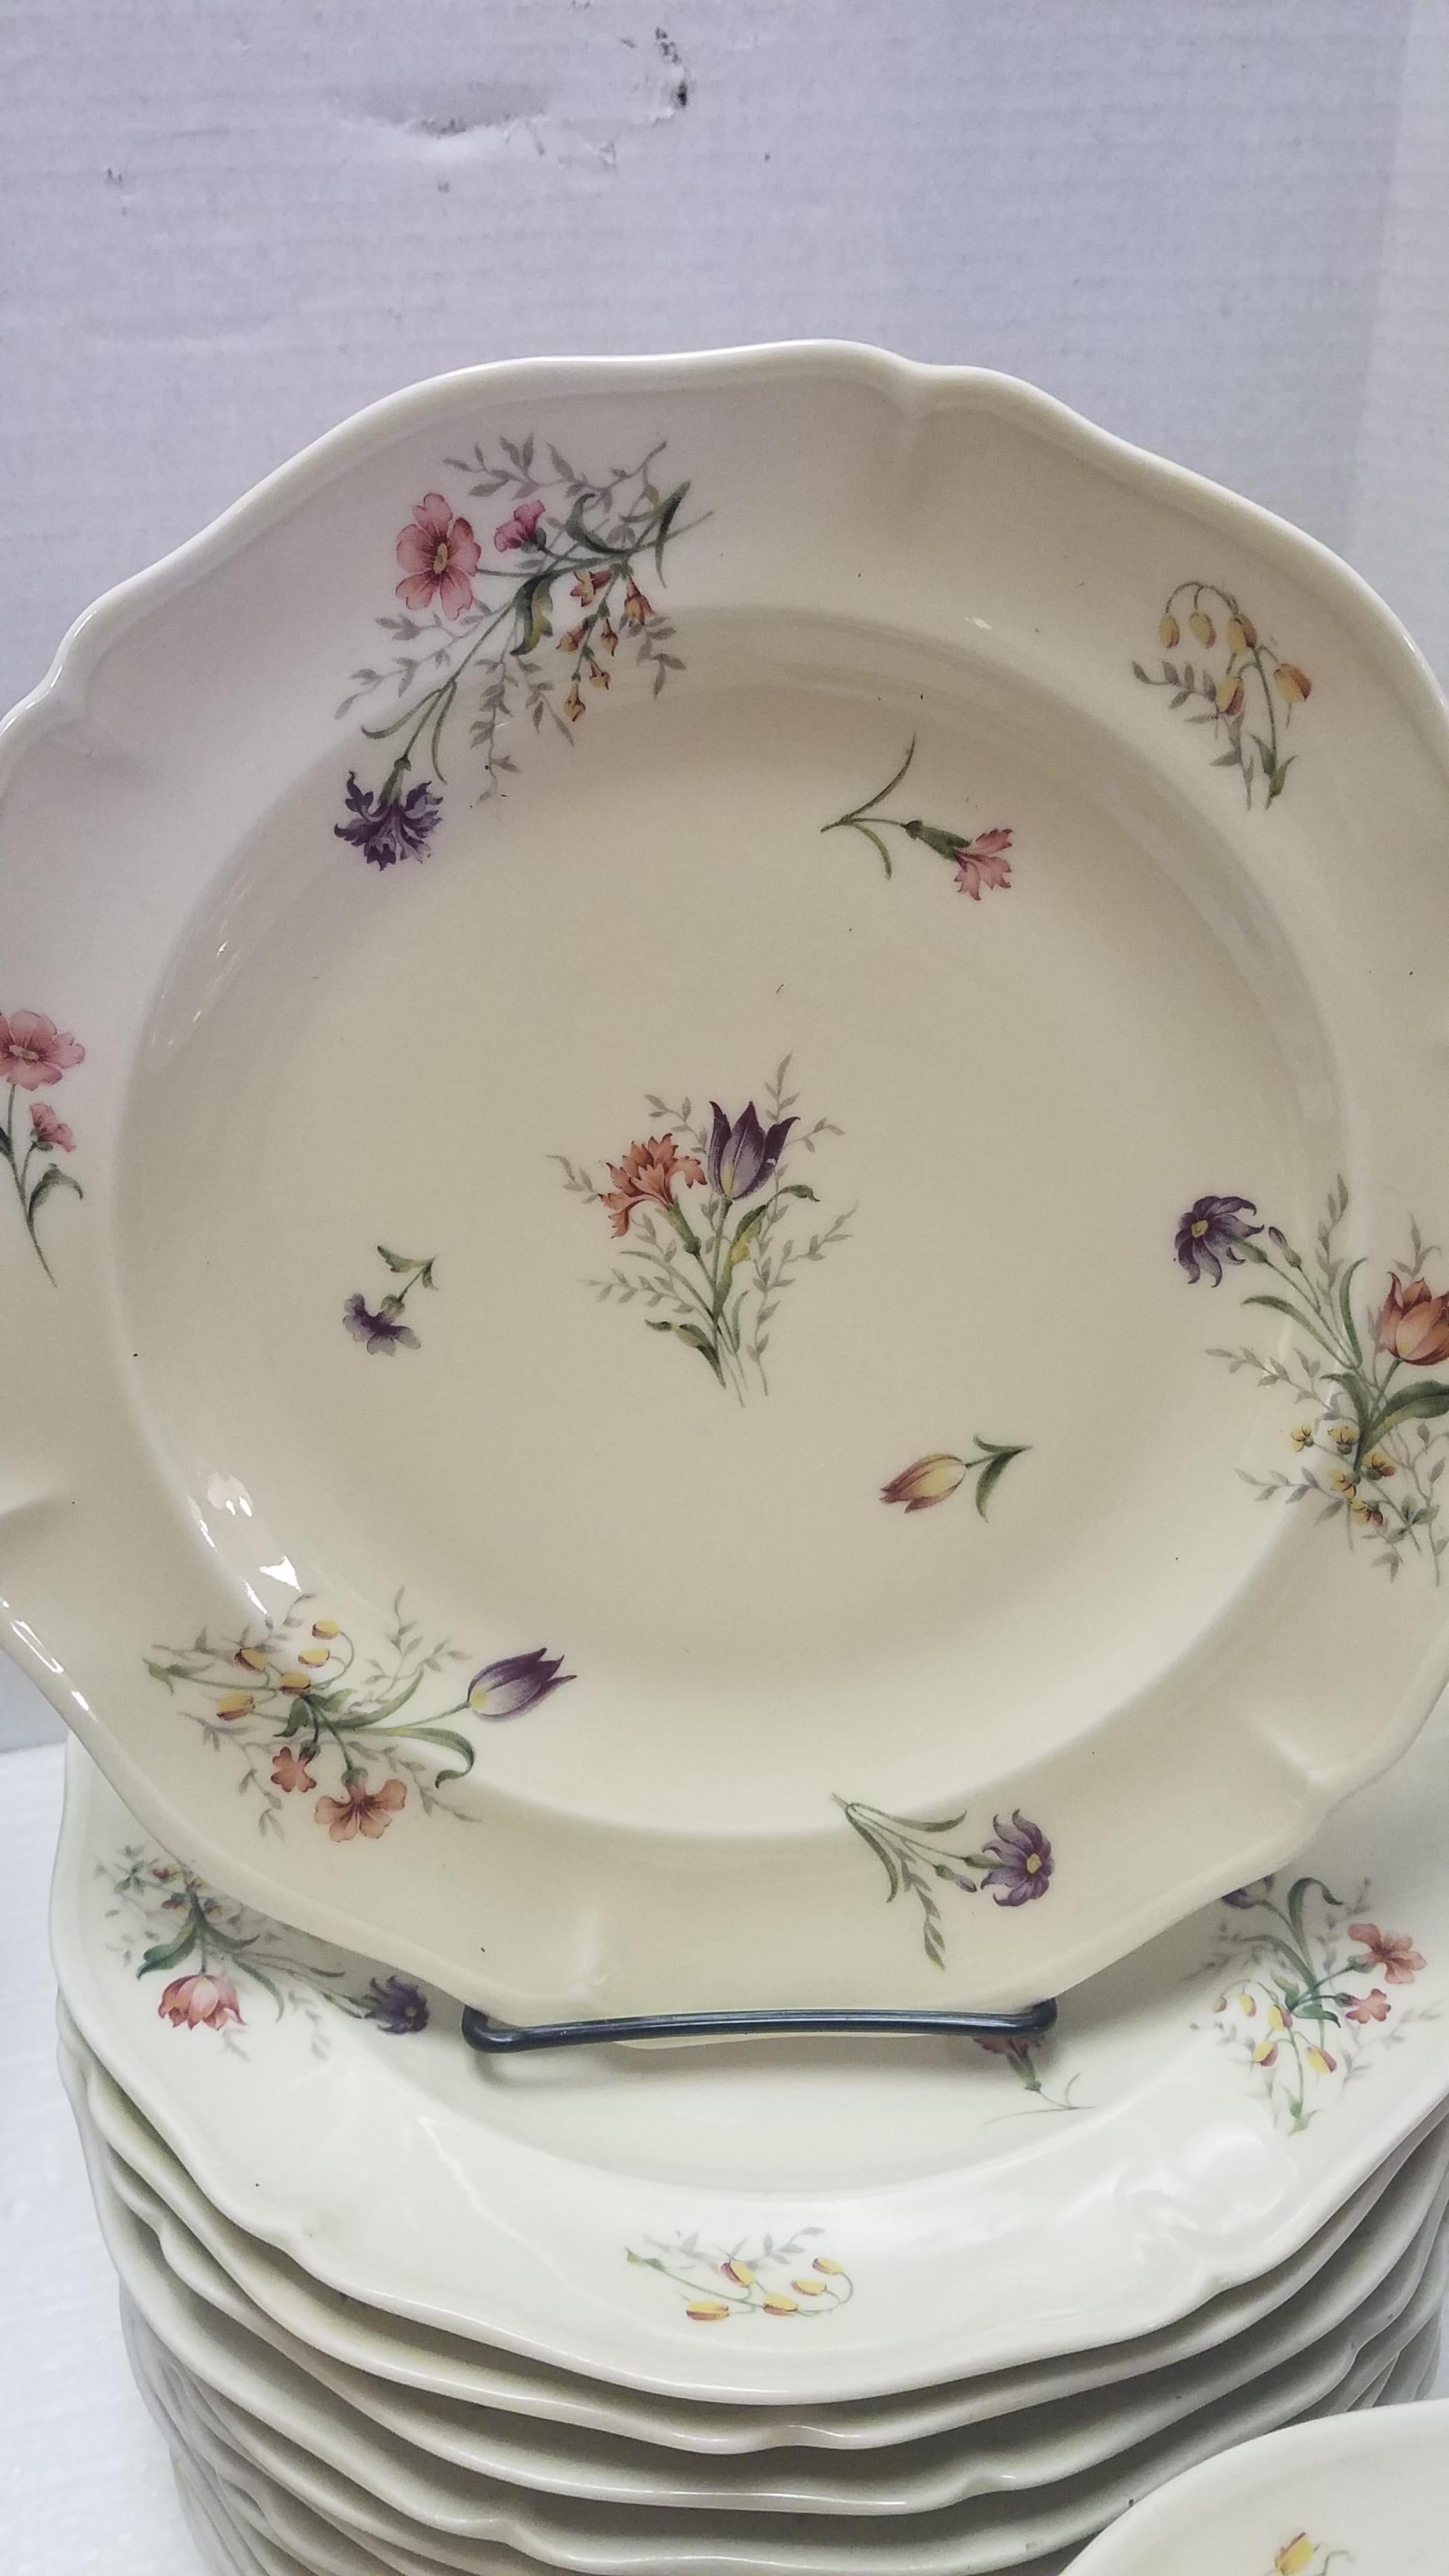 Set of vintage French Limoges dinnerware. See Makers Marks on the back of the pieces. Purchased from the Brittany region of France. Beautifully hand painted with scattered flowers in shades of pink yellow and purple with green foliage. The set